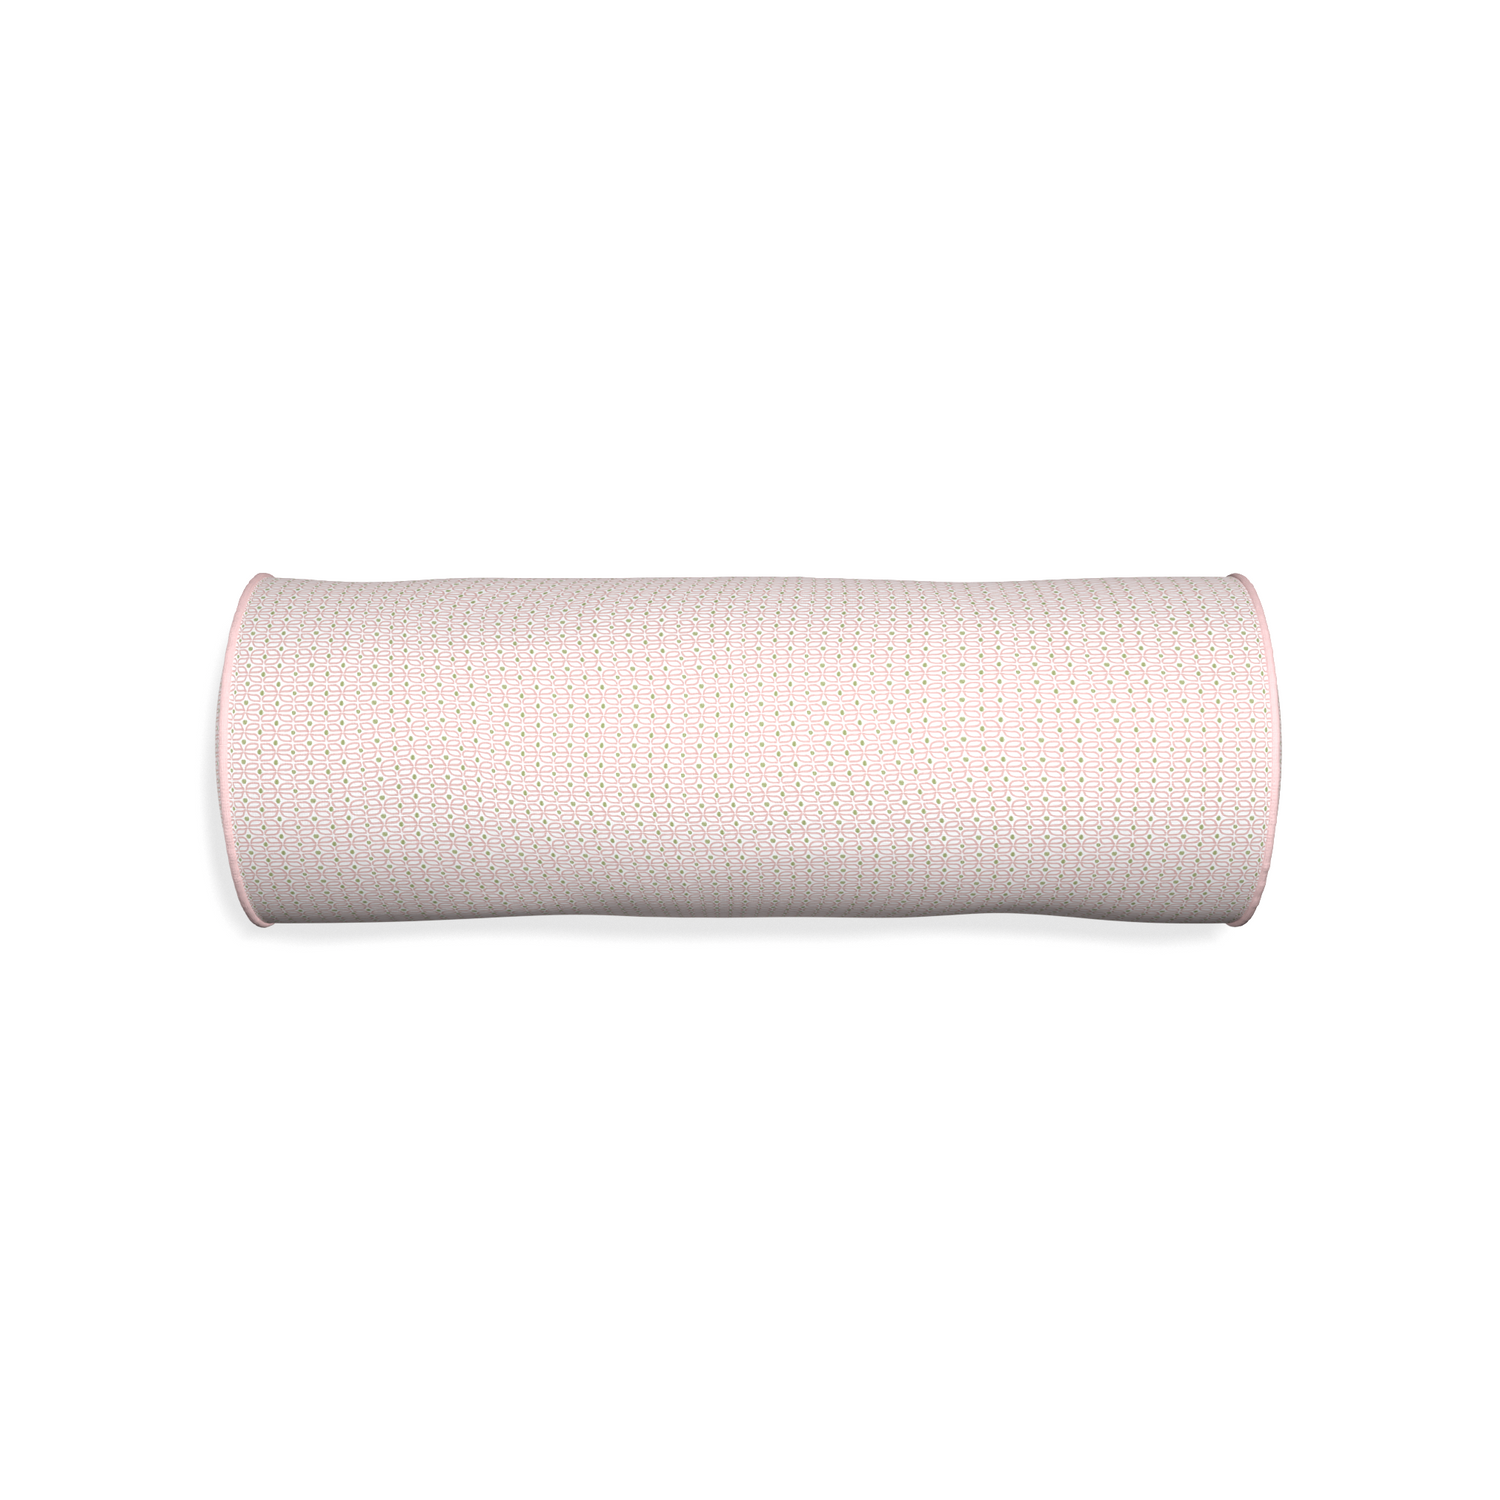 Bolster loomi pink custom pink geometricpillow with petal piping on white background